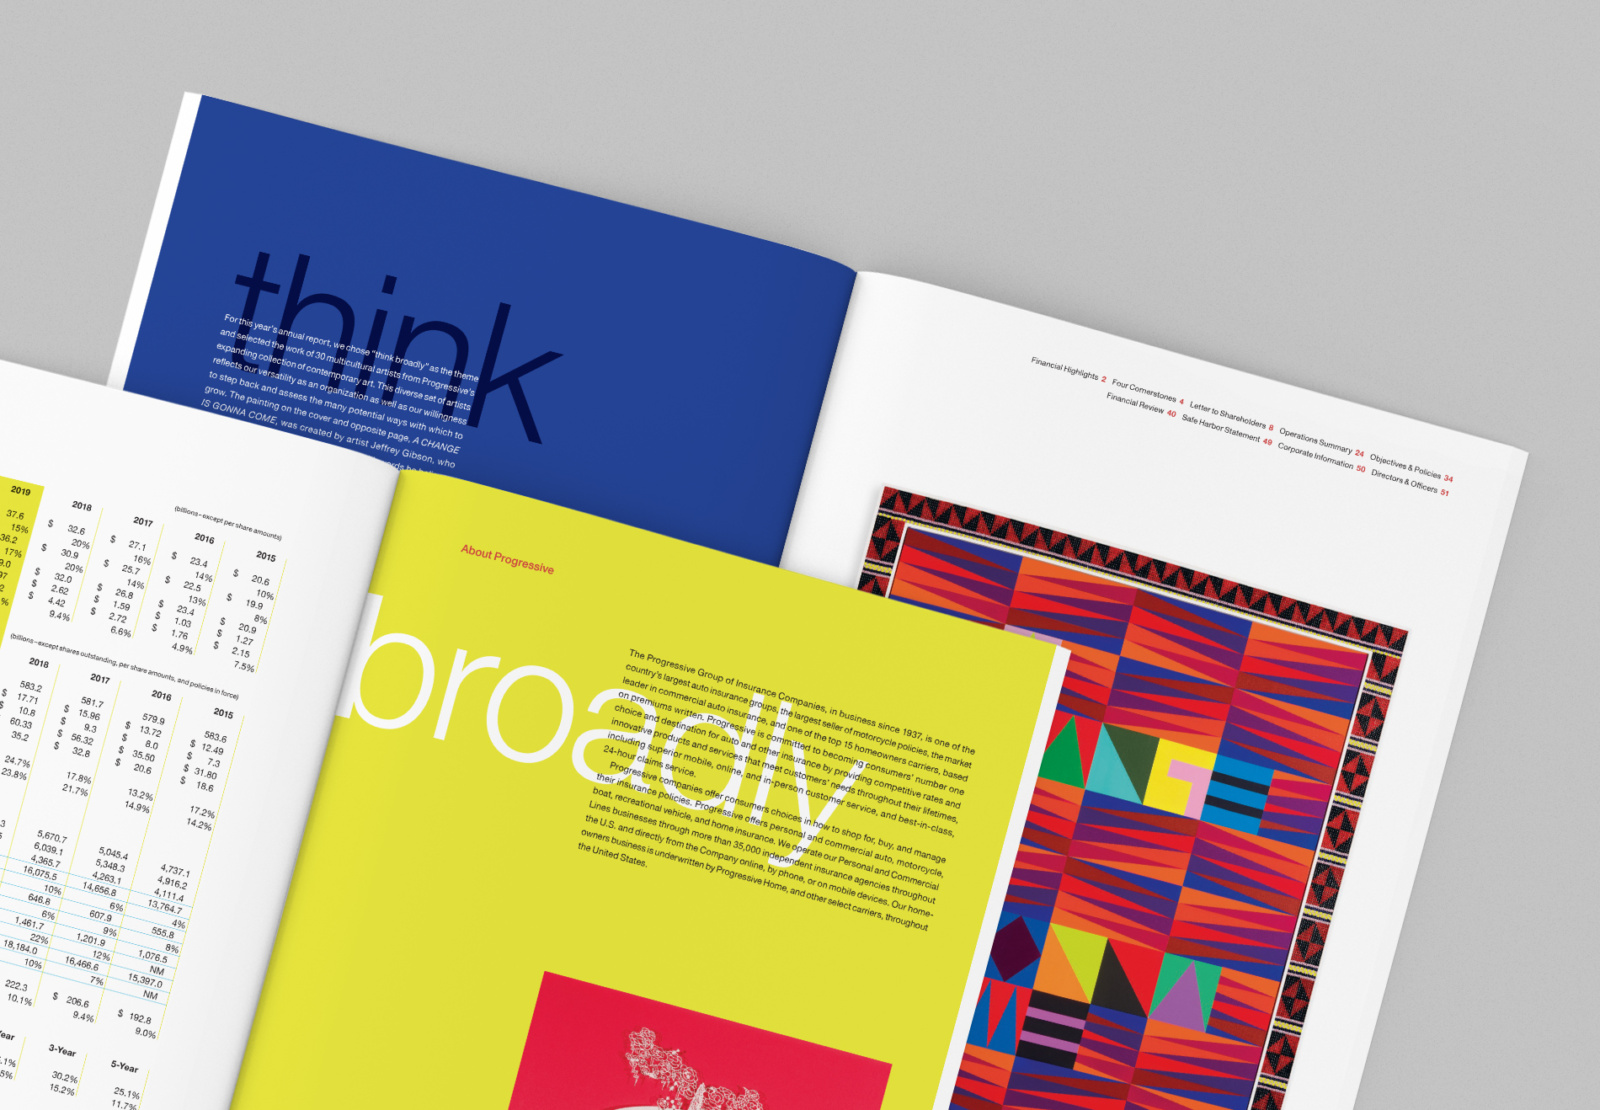 Two spreads from the 2019 Progressive Corporation annual report design that call out the Think Broadly theme using typography